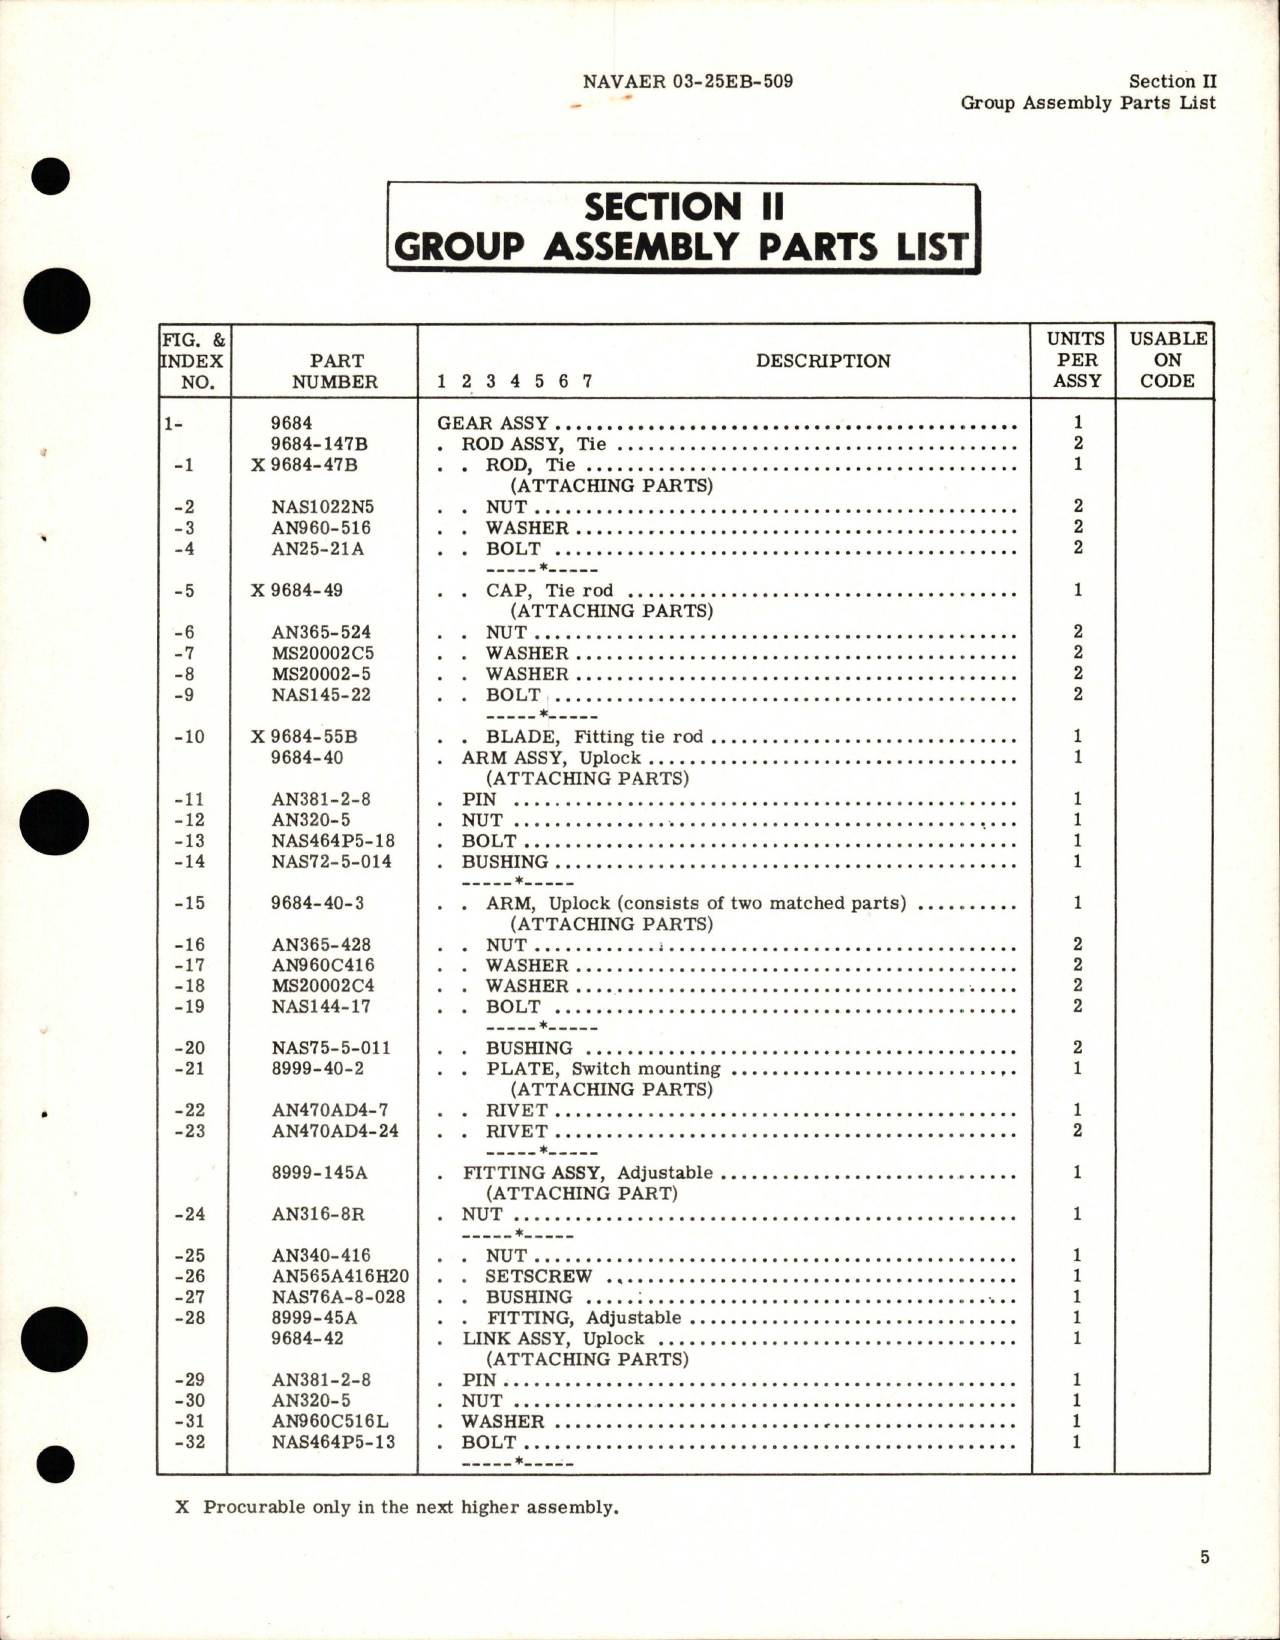 Sample page 7 from AirCorps Library document: Illustrated Parts Breakdown for Gear Assembly - Part 9684 